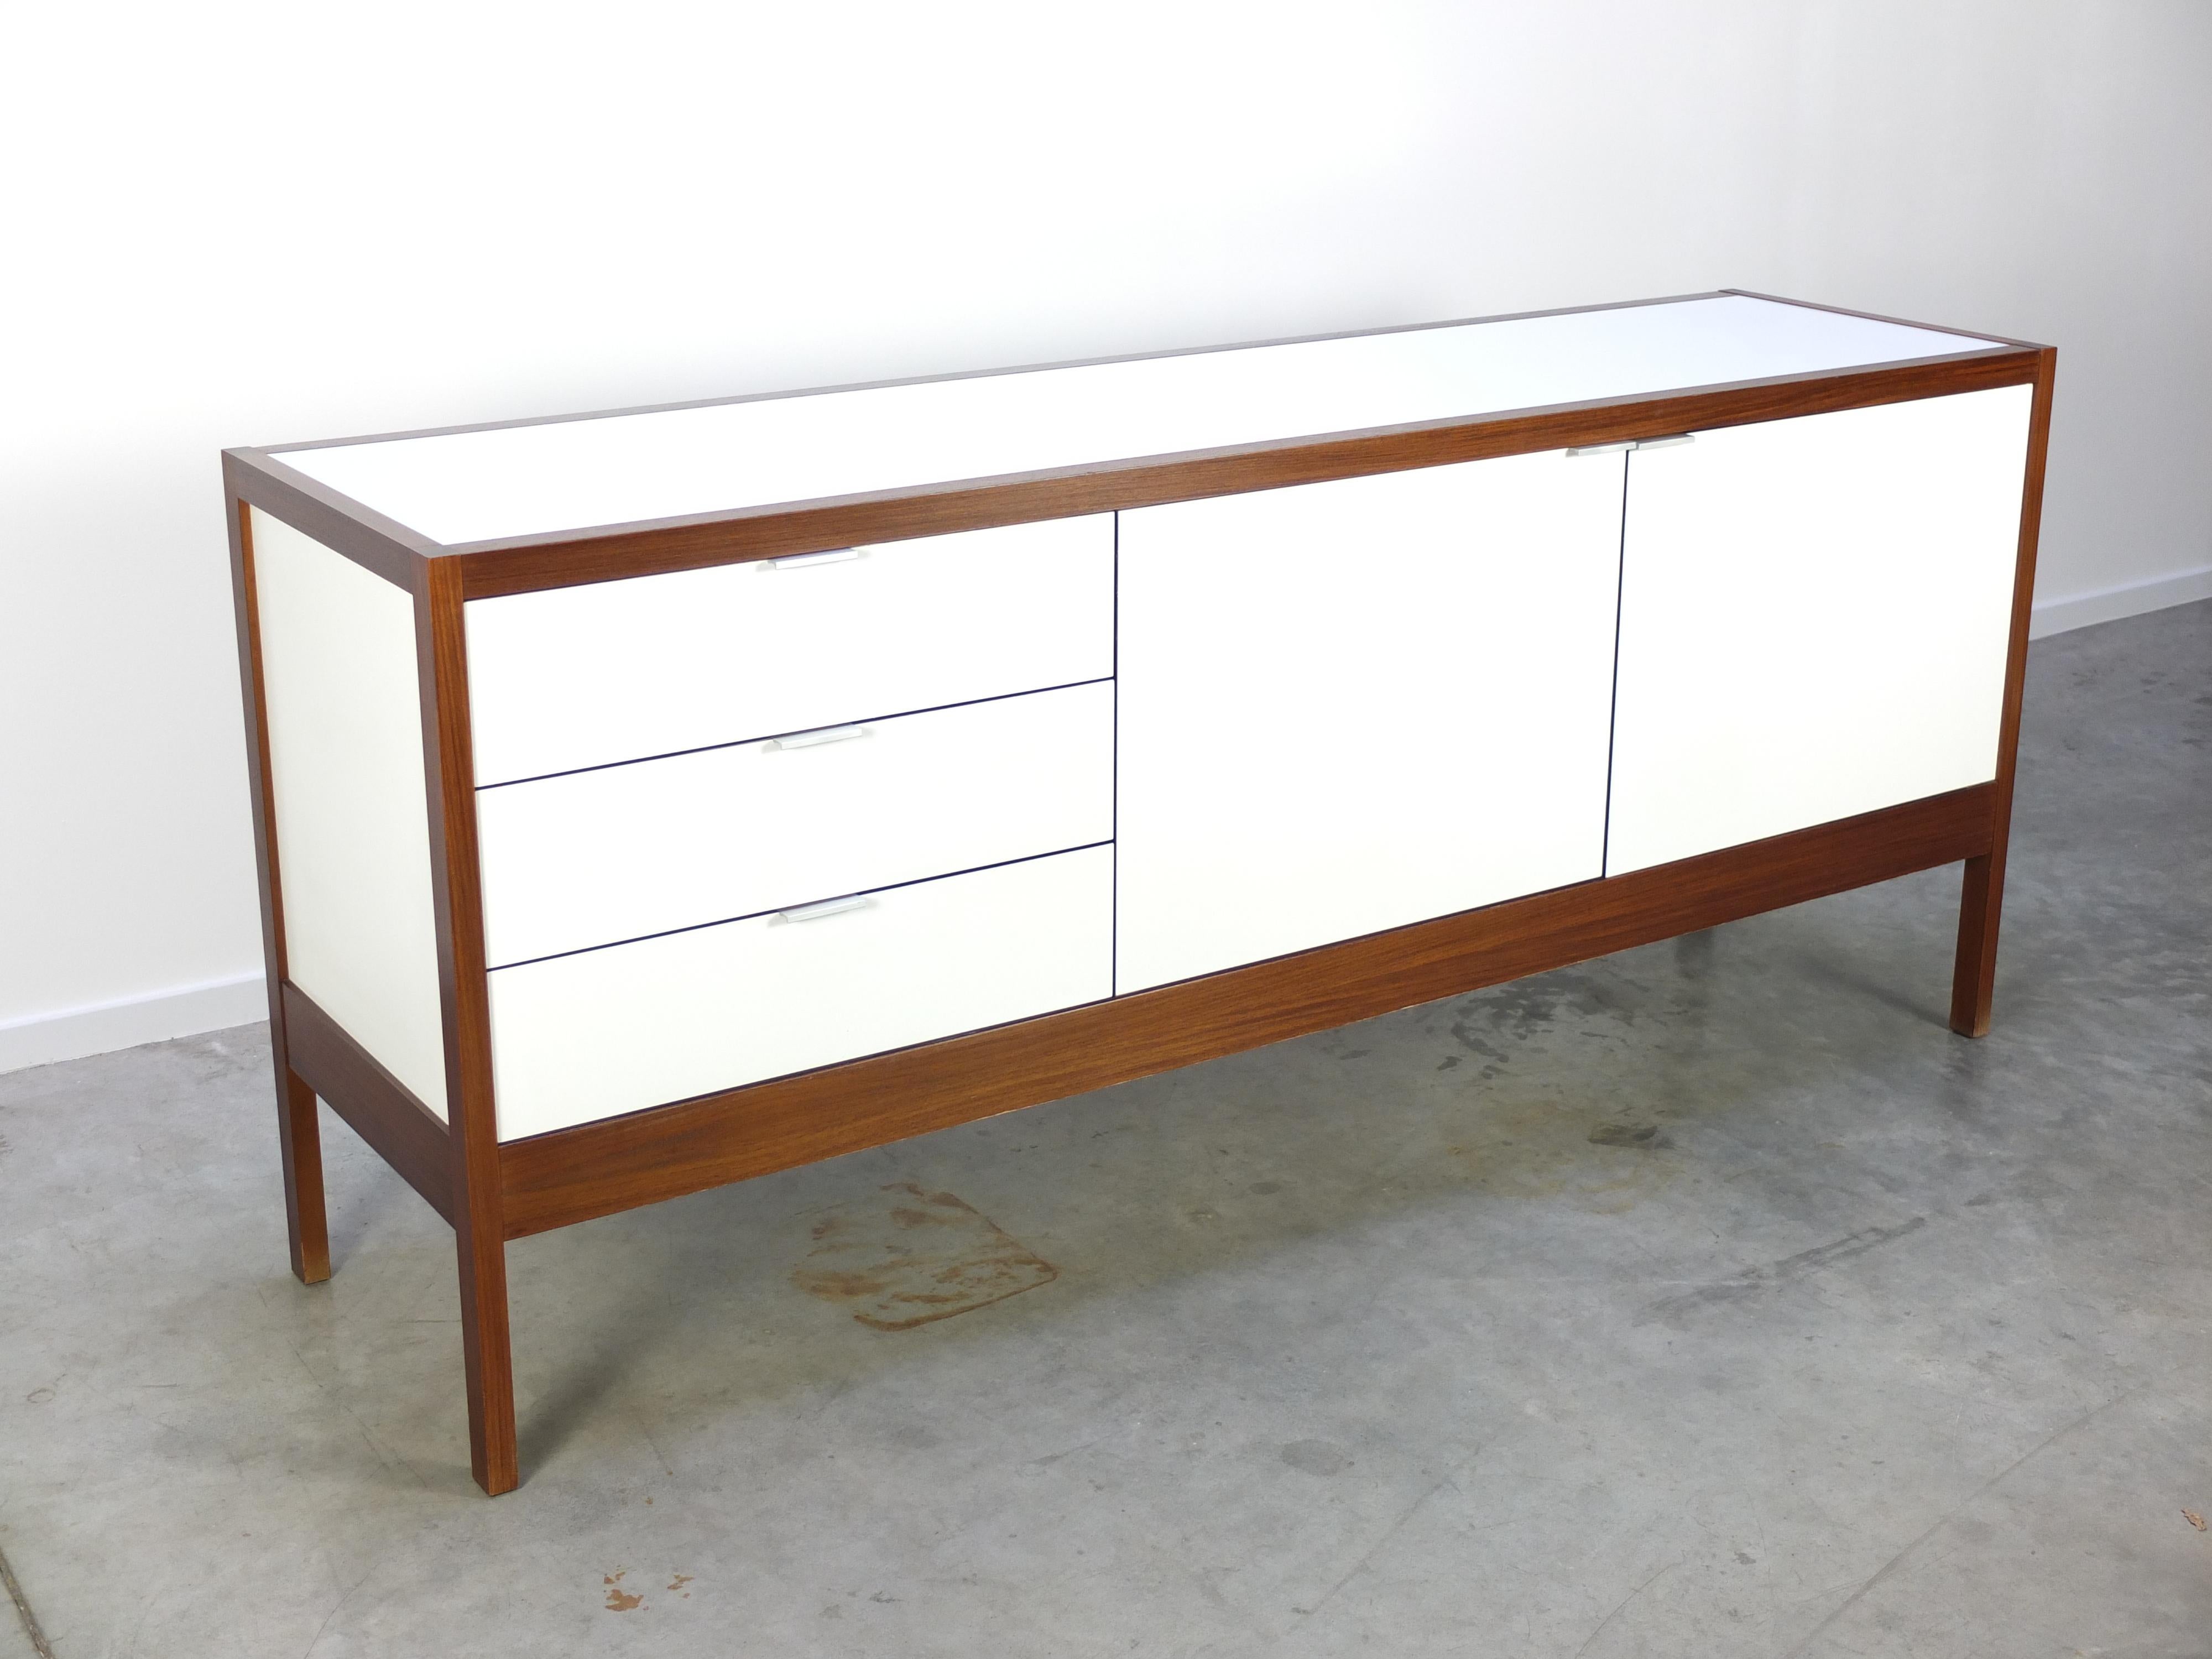 20th Century High End 'Series 3' Sideboard by Dieter Waeckerlin for Idealheim, 1960s For Sale